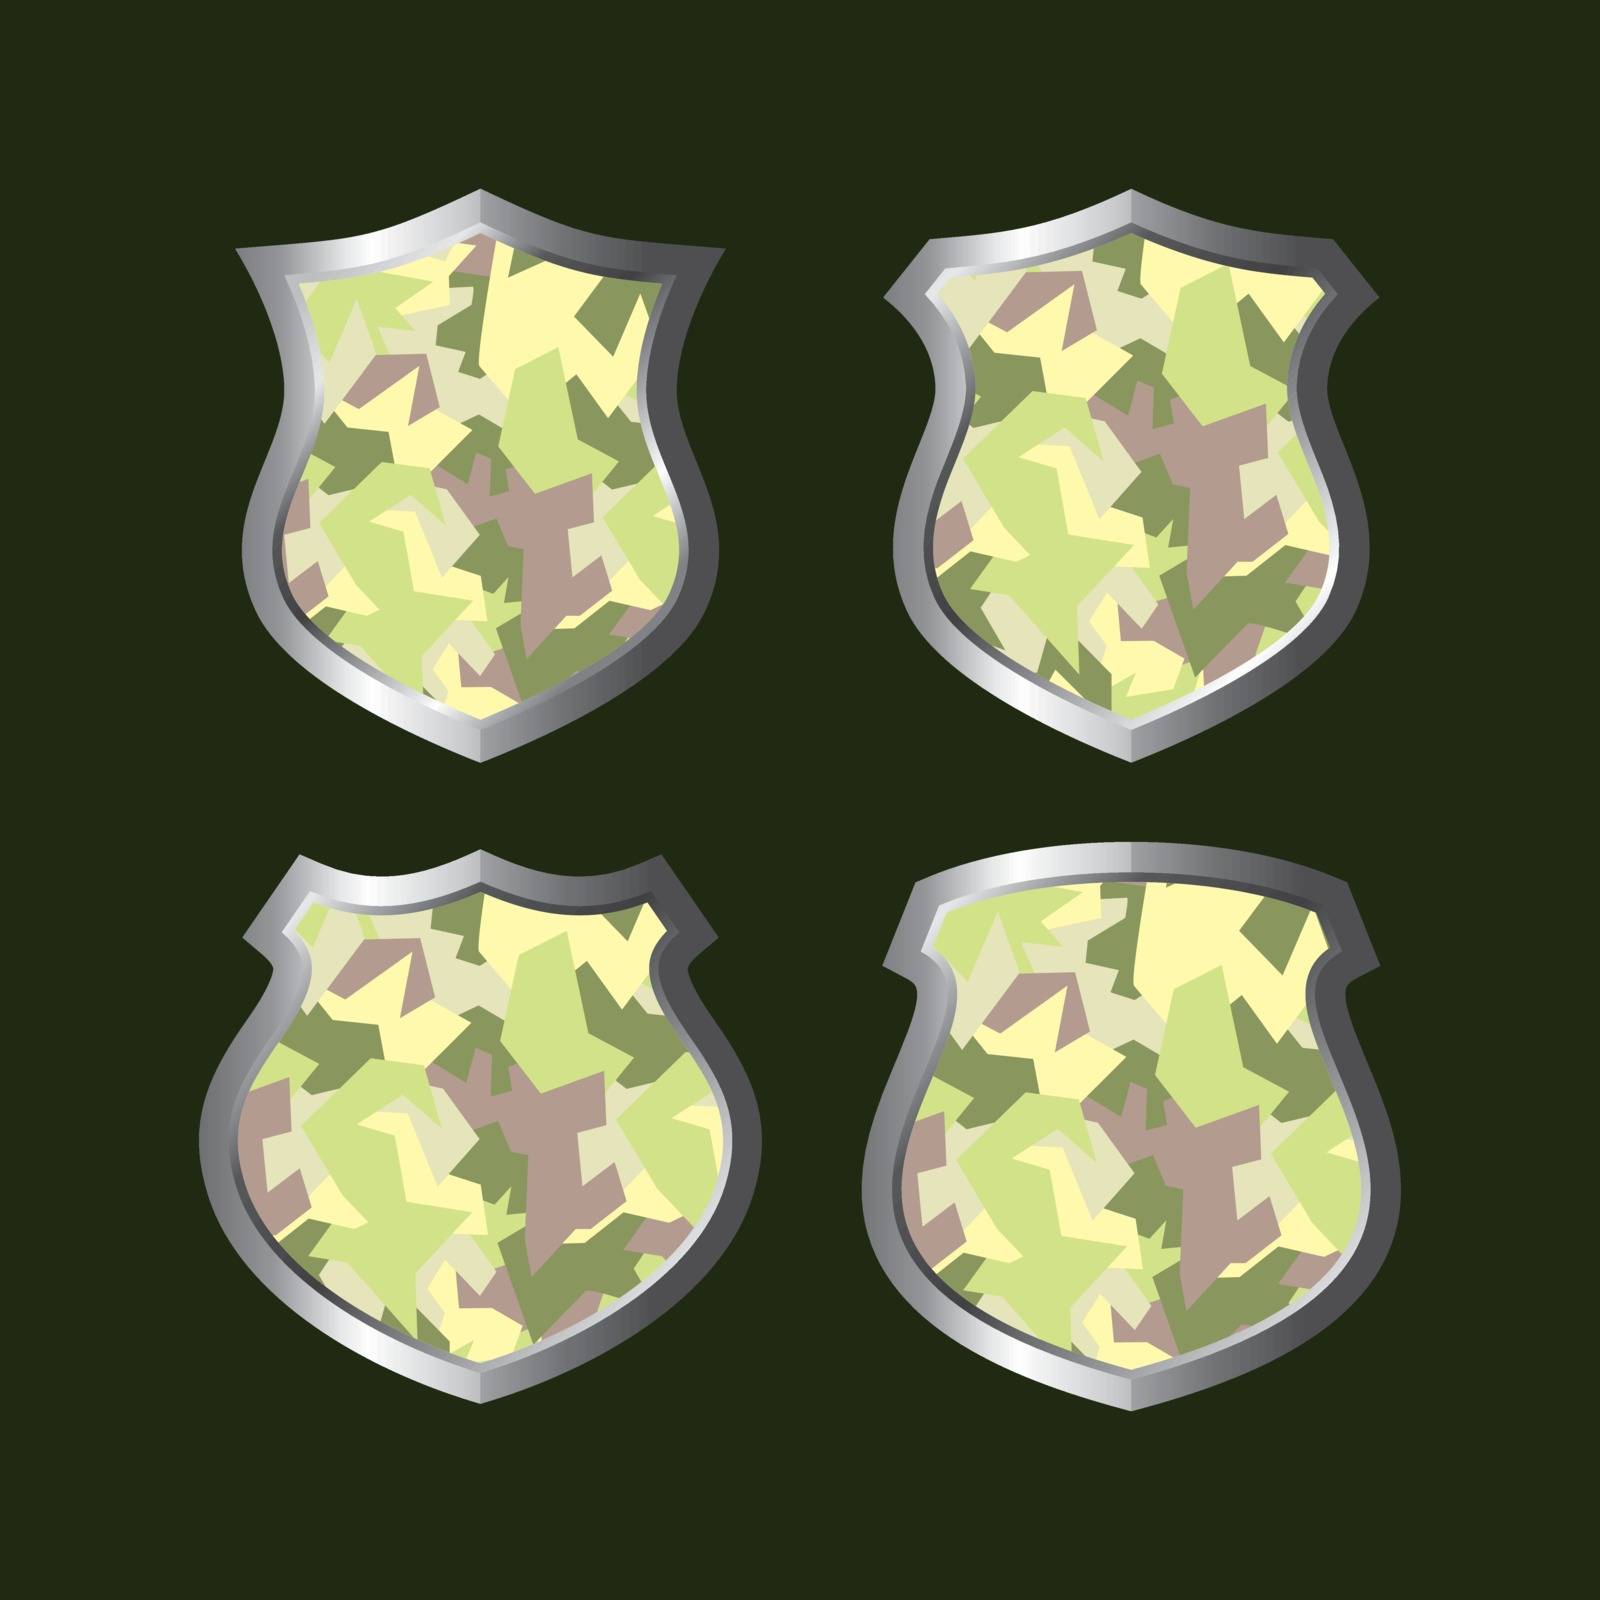 army camouflage shield theme vector art illustration